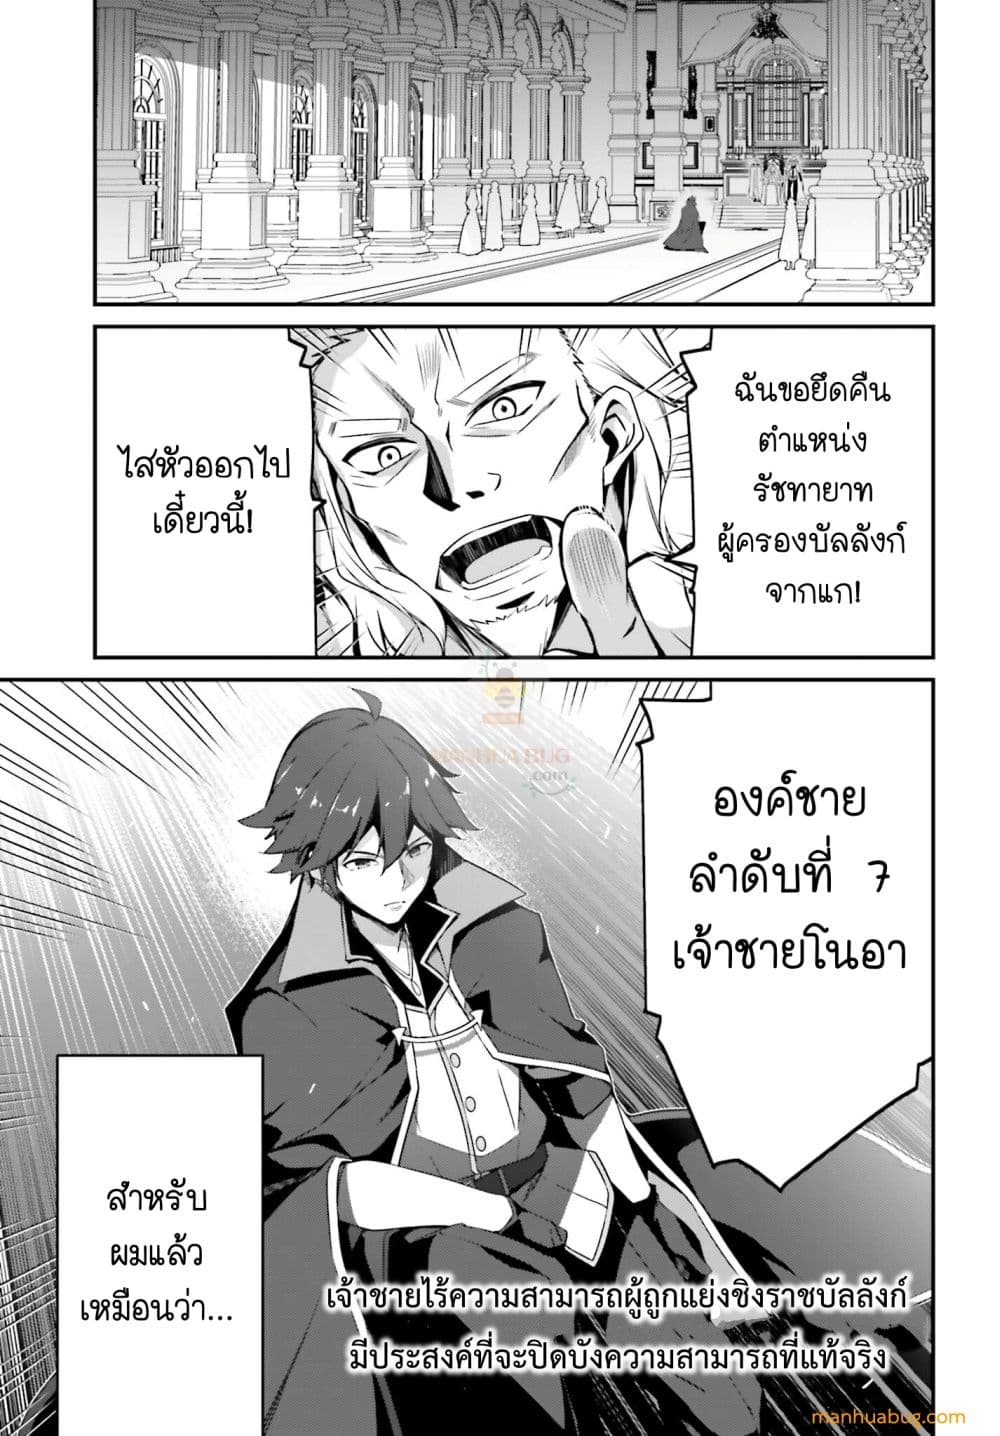 THE INCOMPETENT PRINCE WHO HAS BEEN BANISHED WANTS TO HIDE HIS ABILITIES~ ตอนที่ 1 (2)